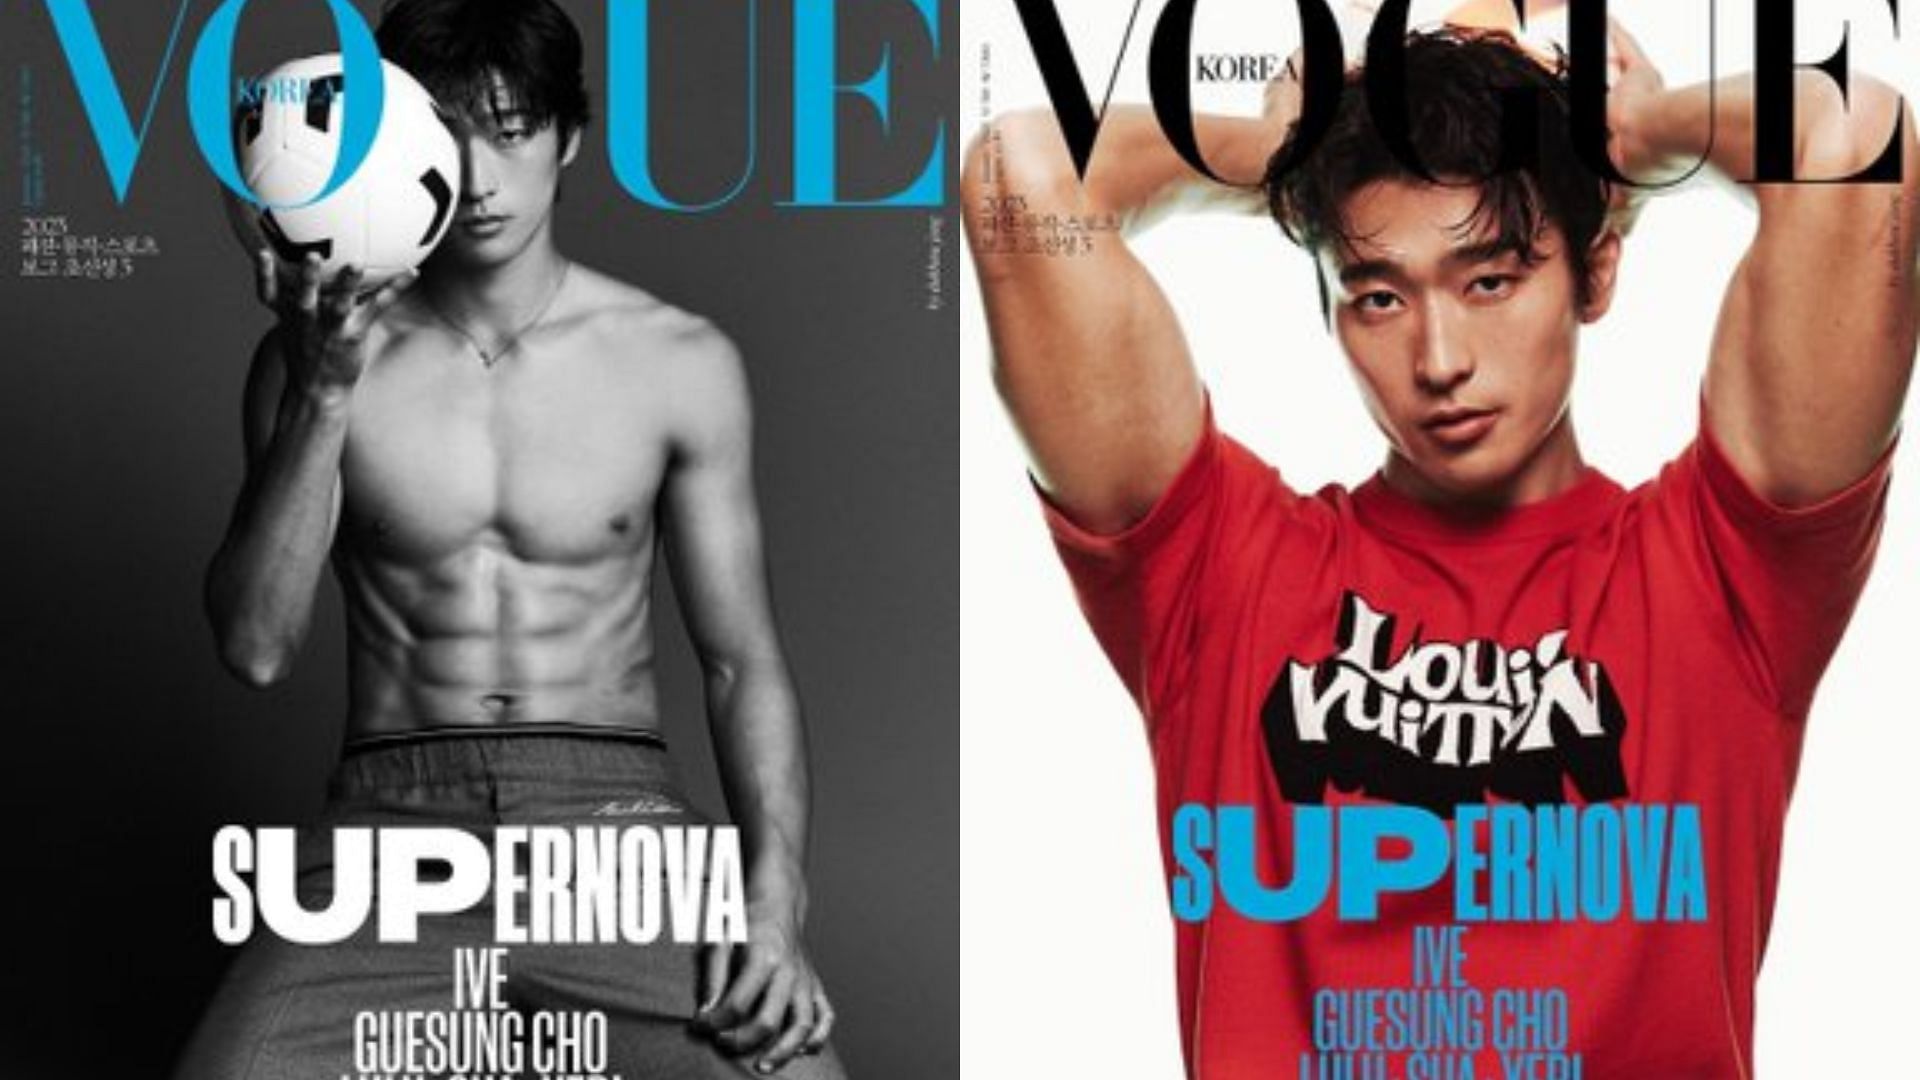 Cho Gue-sung features on Vogue Korea cover (Image via Twitter/@kdrama_baragi)